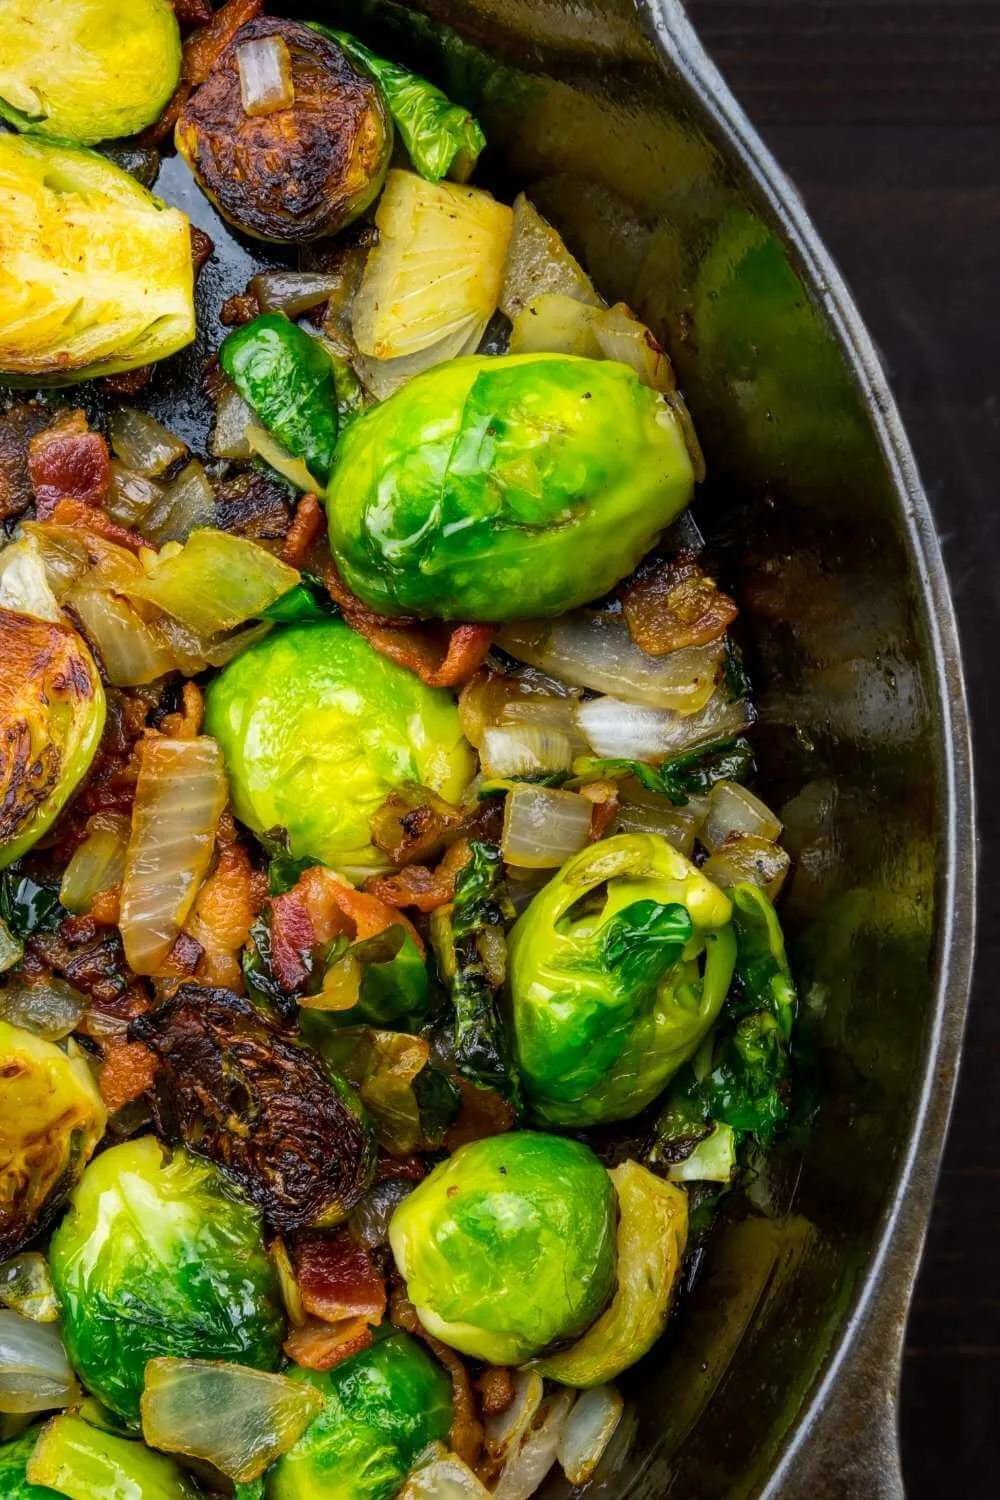 How Long To Bake Brussel Sprouts At 400